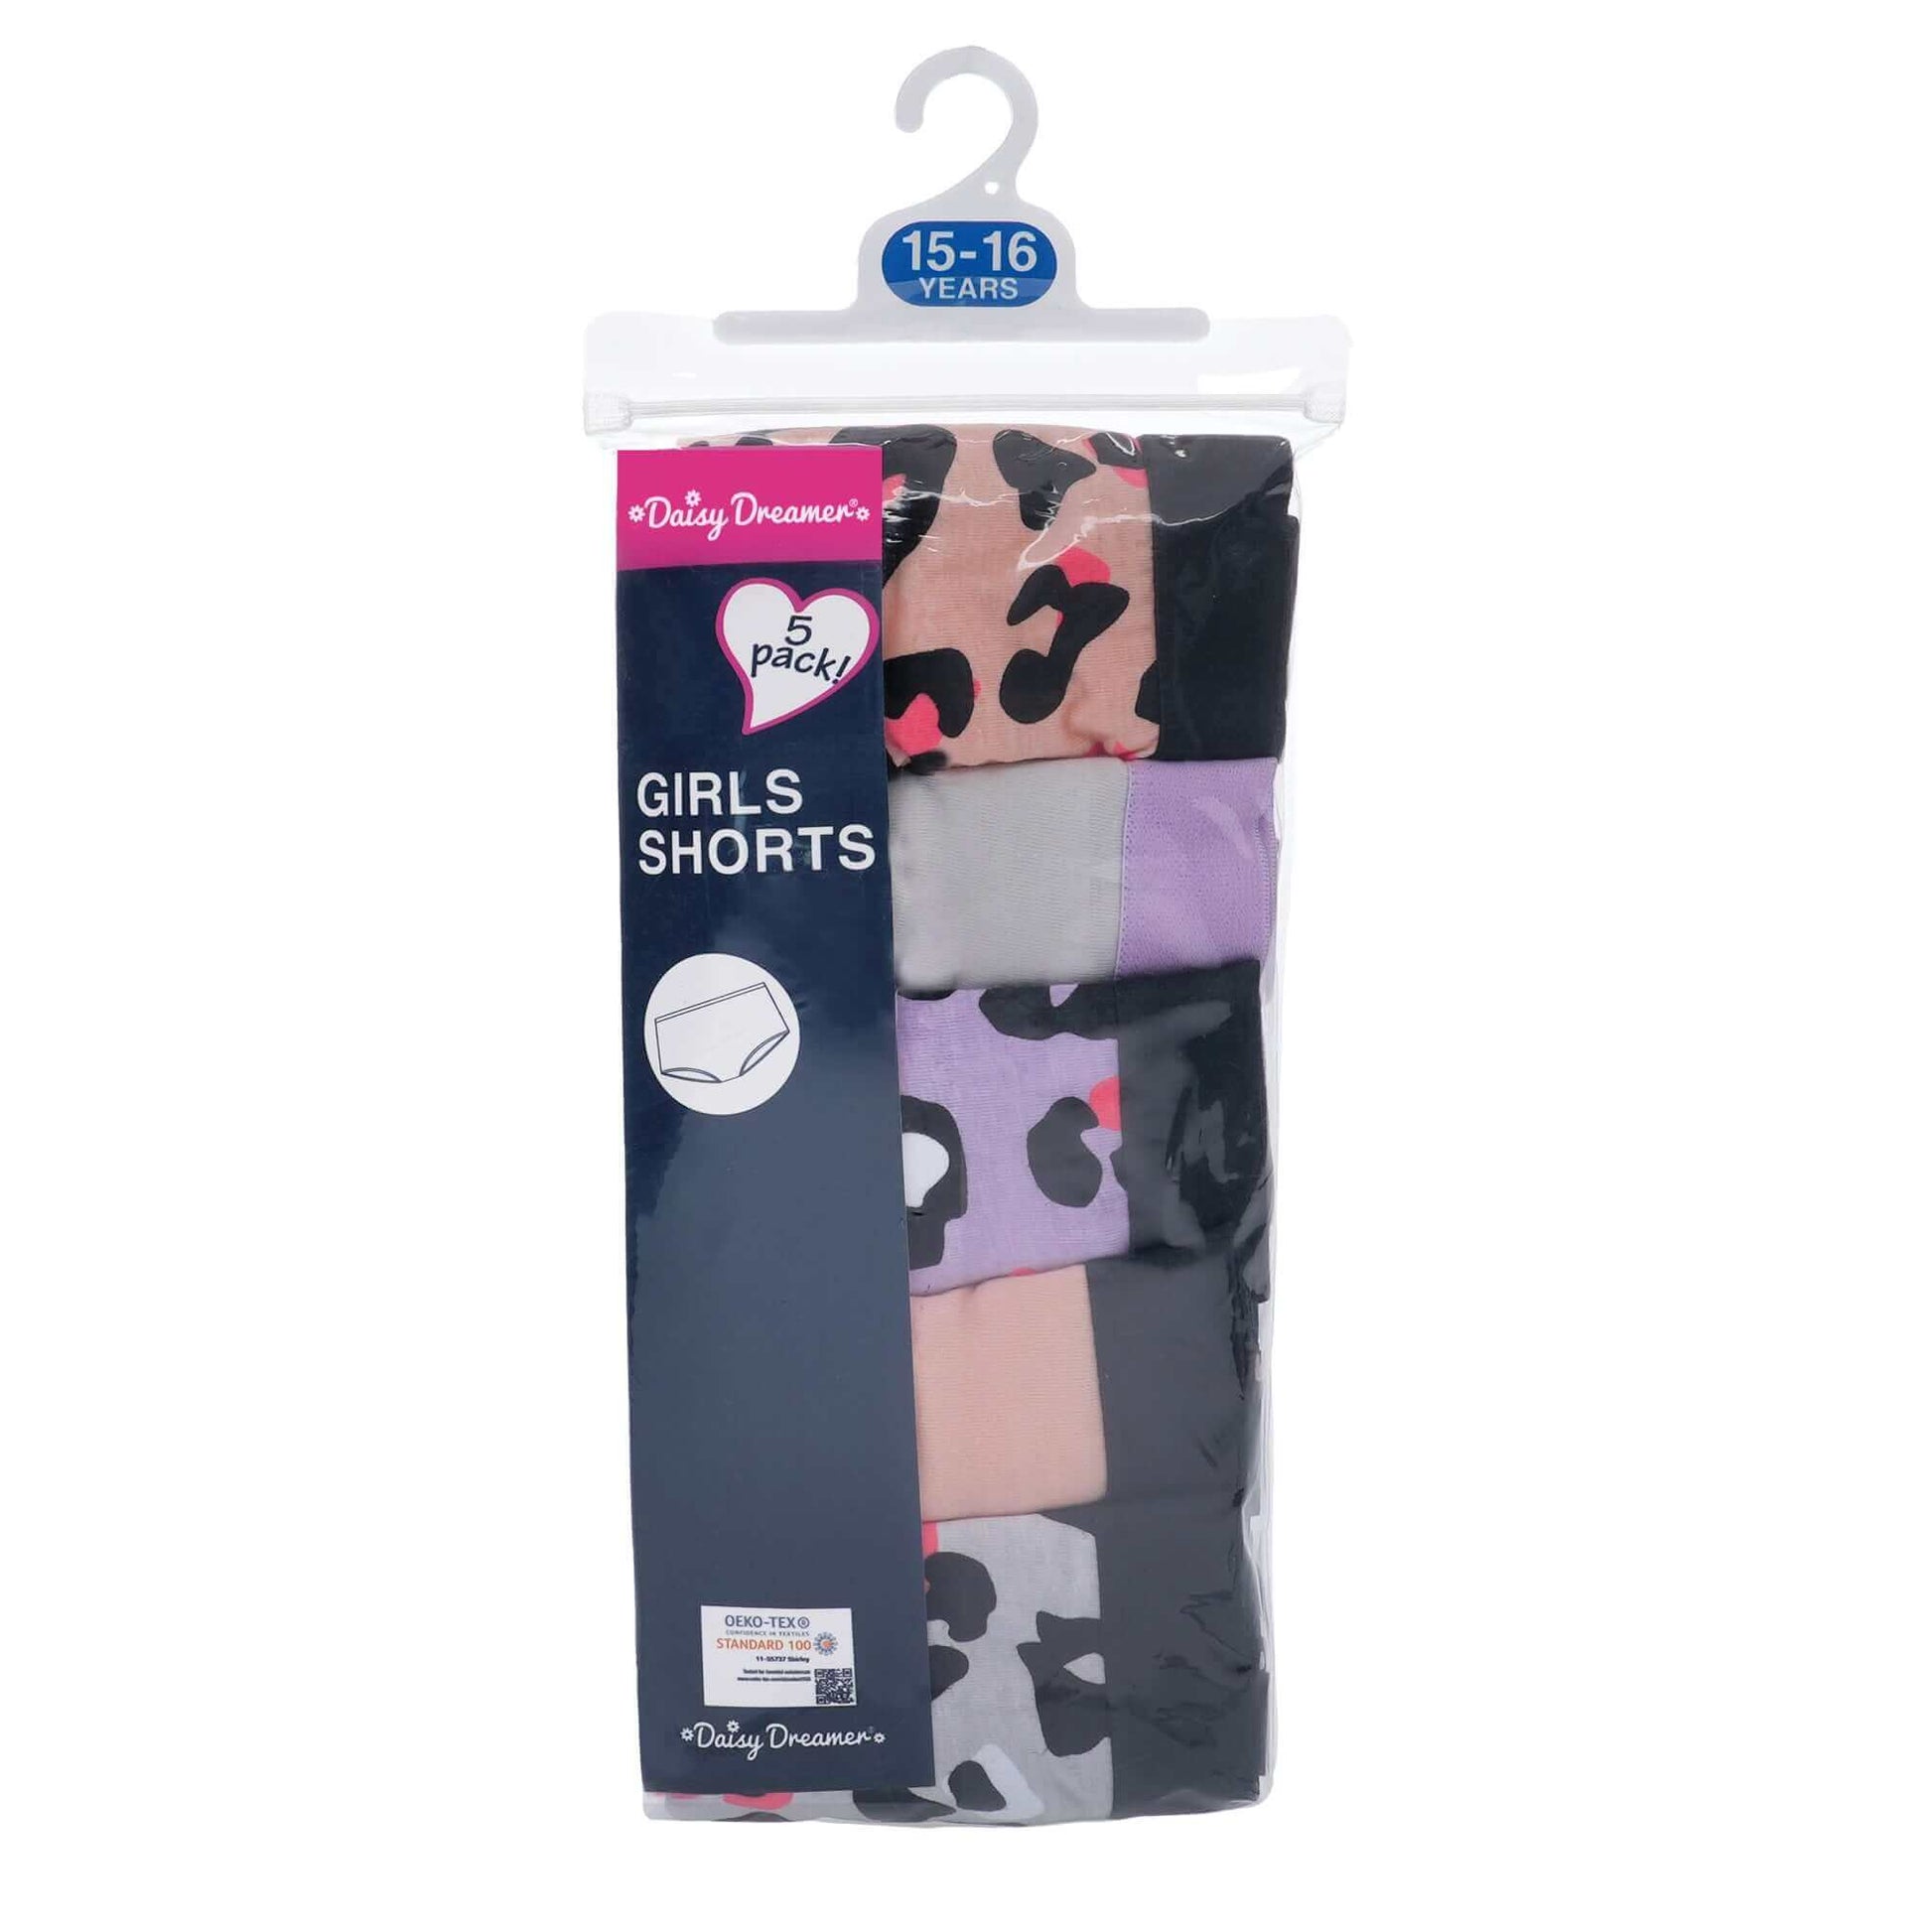 Pack of 5 Girls Underwear Briefs, Soft Cotton Comfort Fit Perfect for Everyday Wear. Buy now for £8.00. A Underwear by Daisy Dreamer. 11-12, 13-14, 15-16, 9-10, black, bottom, breathable, briefs, childrens, comfortable, cosy, cotton, girls, ladies, leopar